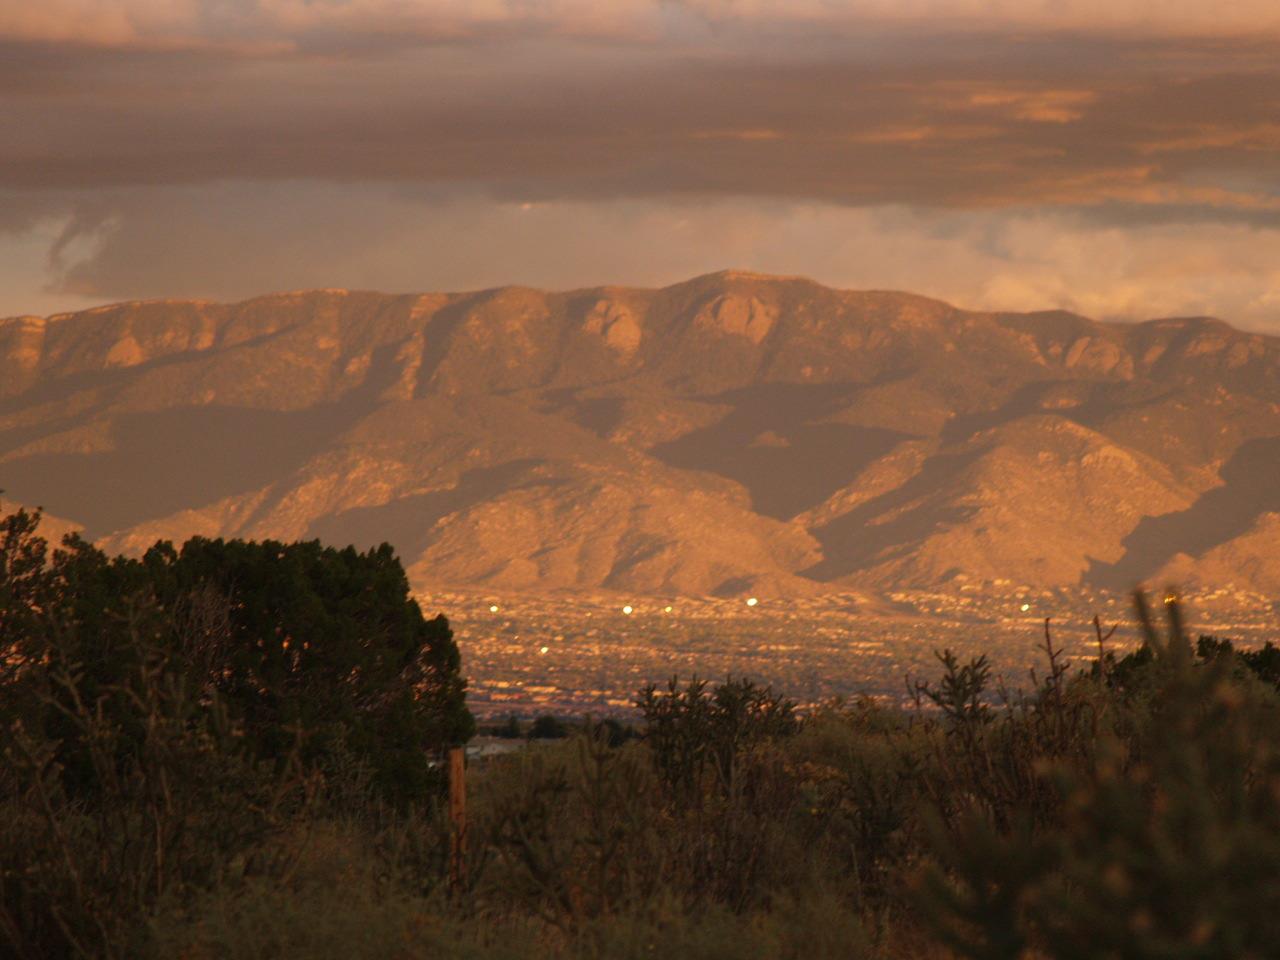 A sunset photo where the mountains are the main focus in the background